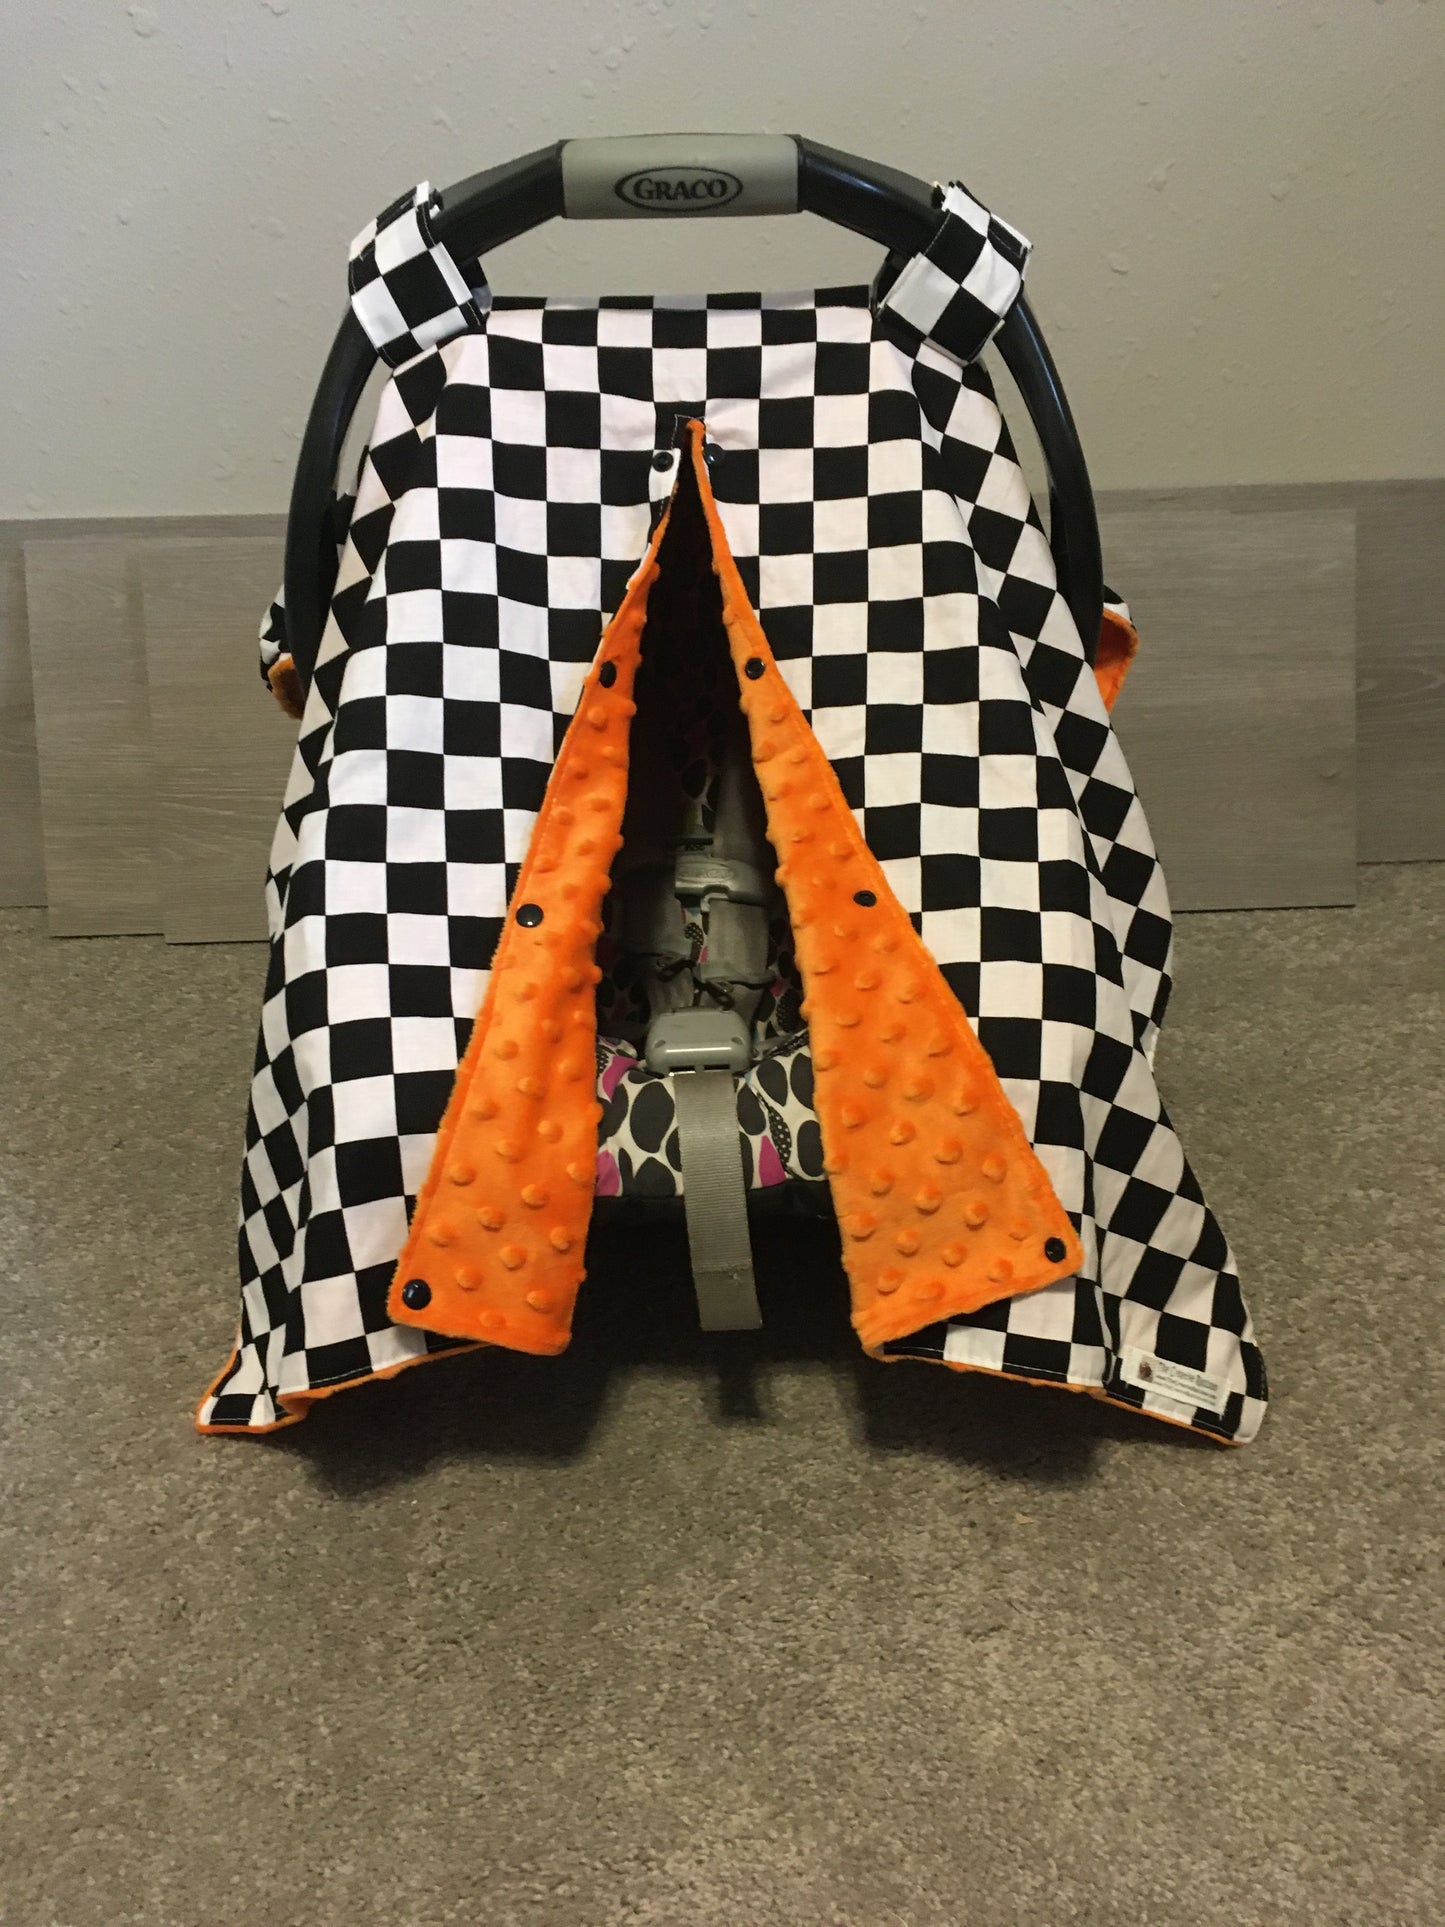 racing check car seat canopy shown in orange minky, in the open option